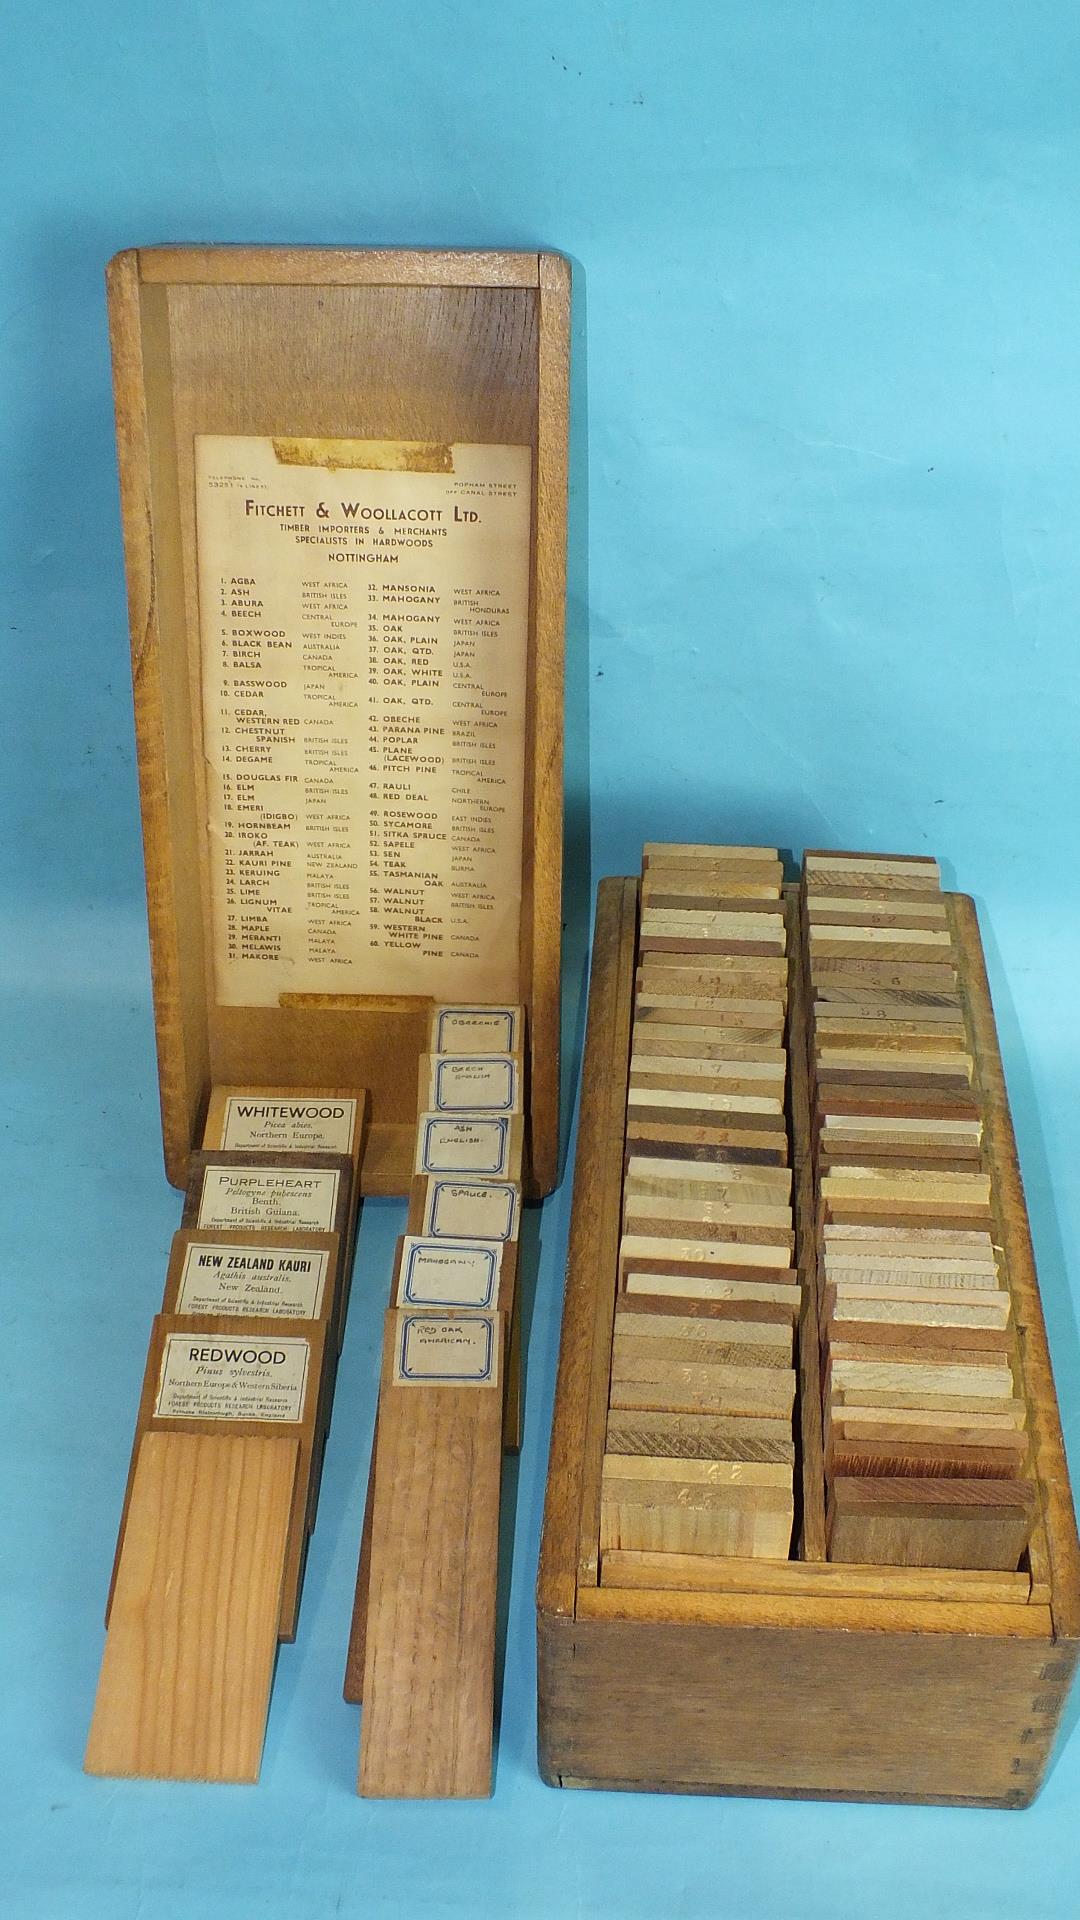 A part-set of Fitchett & Woollacott Ltd wood samples in fitted box, with index of sixty samples, - Image 3 of 3